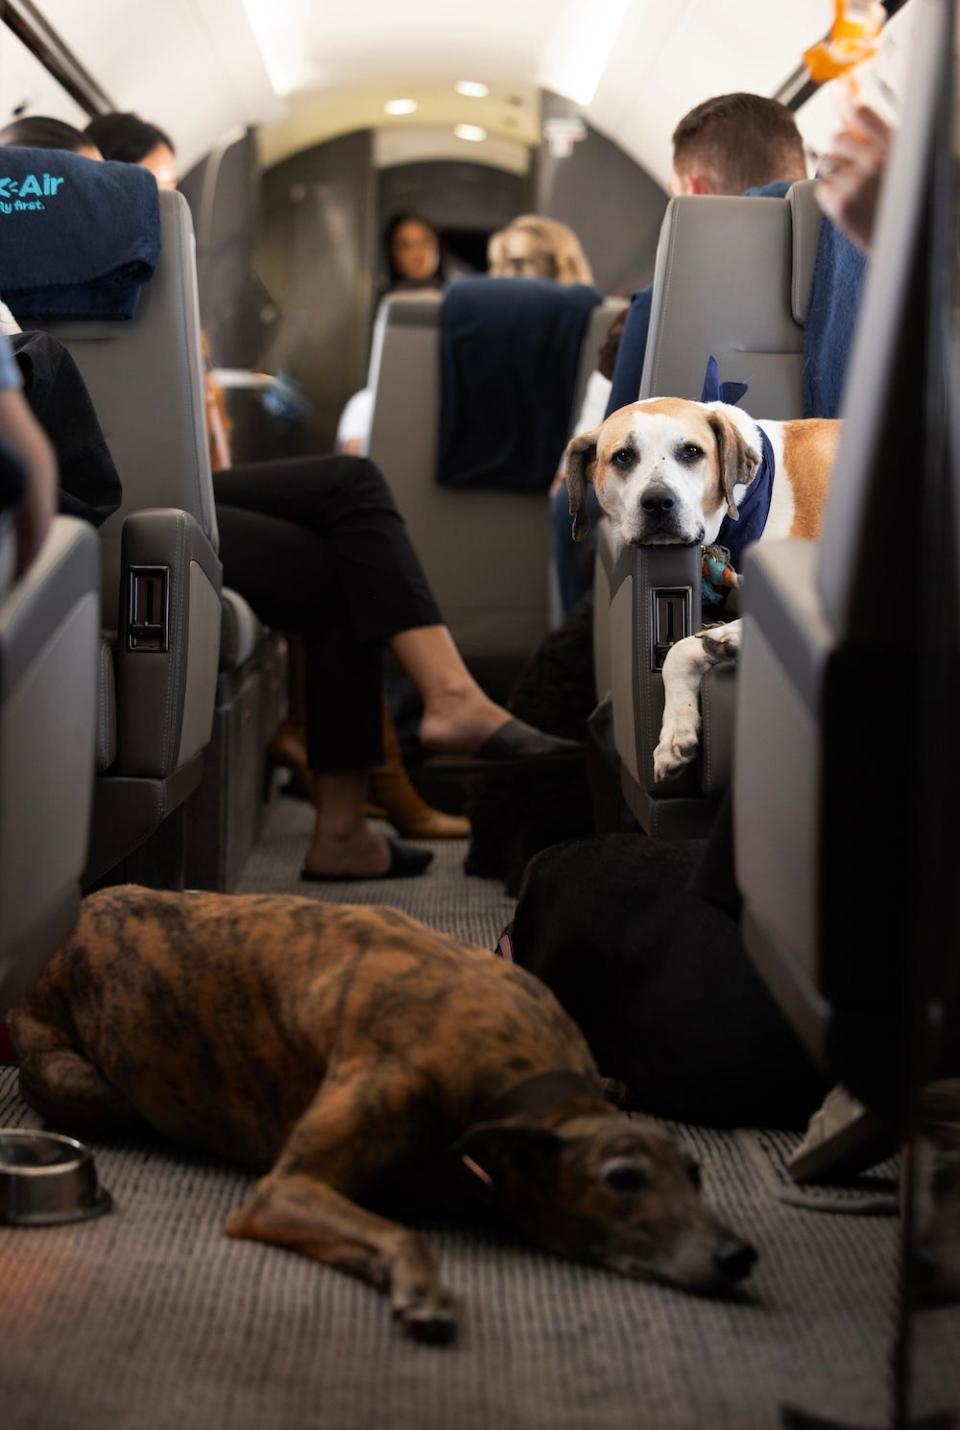 Dogs get treated like they're in first class.